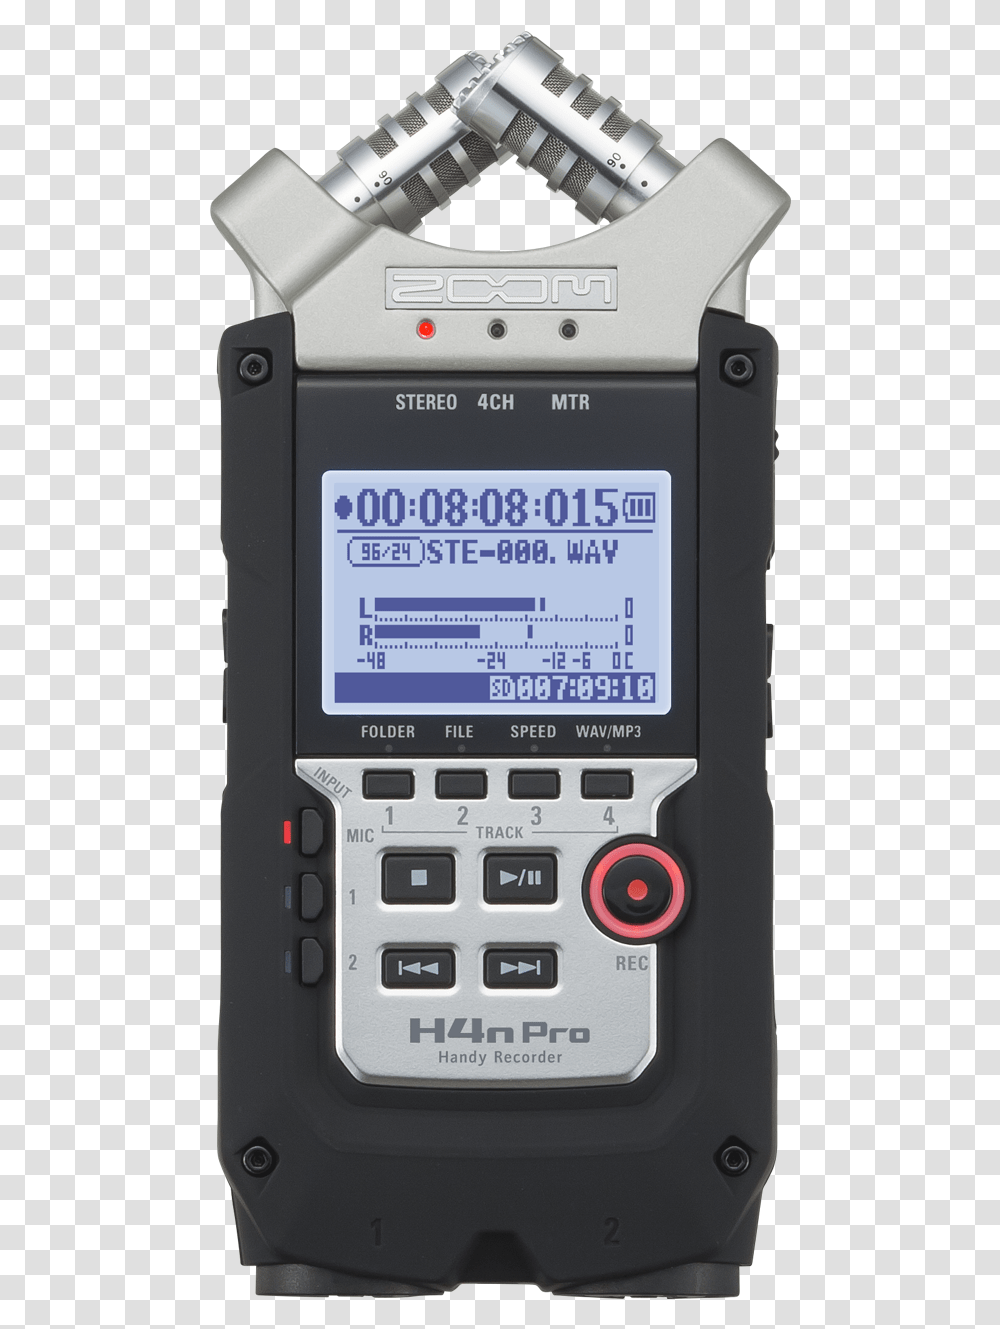 Zoom H4n Pro Digital Multitrack Recorder, Mobile Phone, Electronics, Cell Phone, Calculator Transparent Png